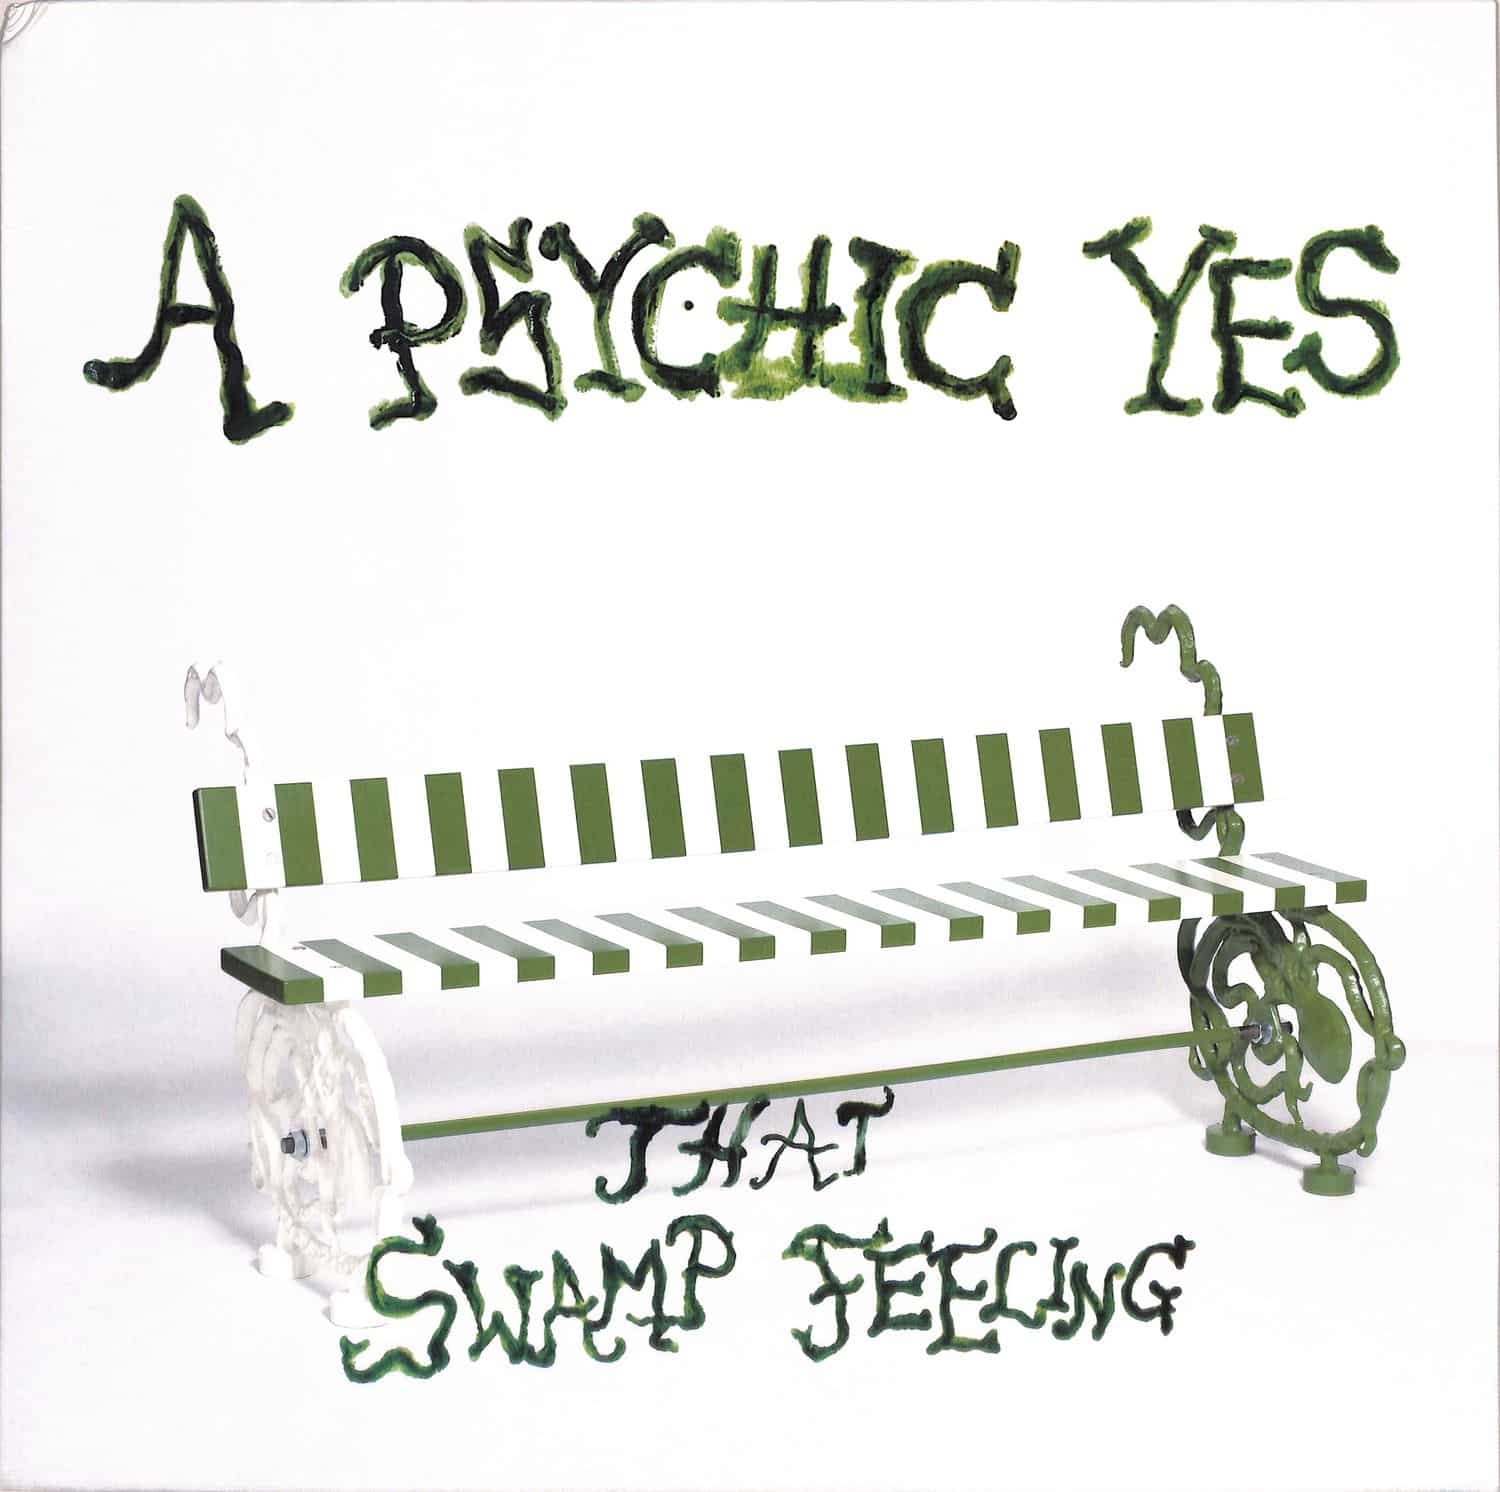 A Psychic Yes - THAT SWAMP FEELING